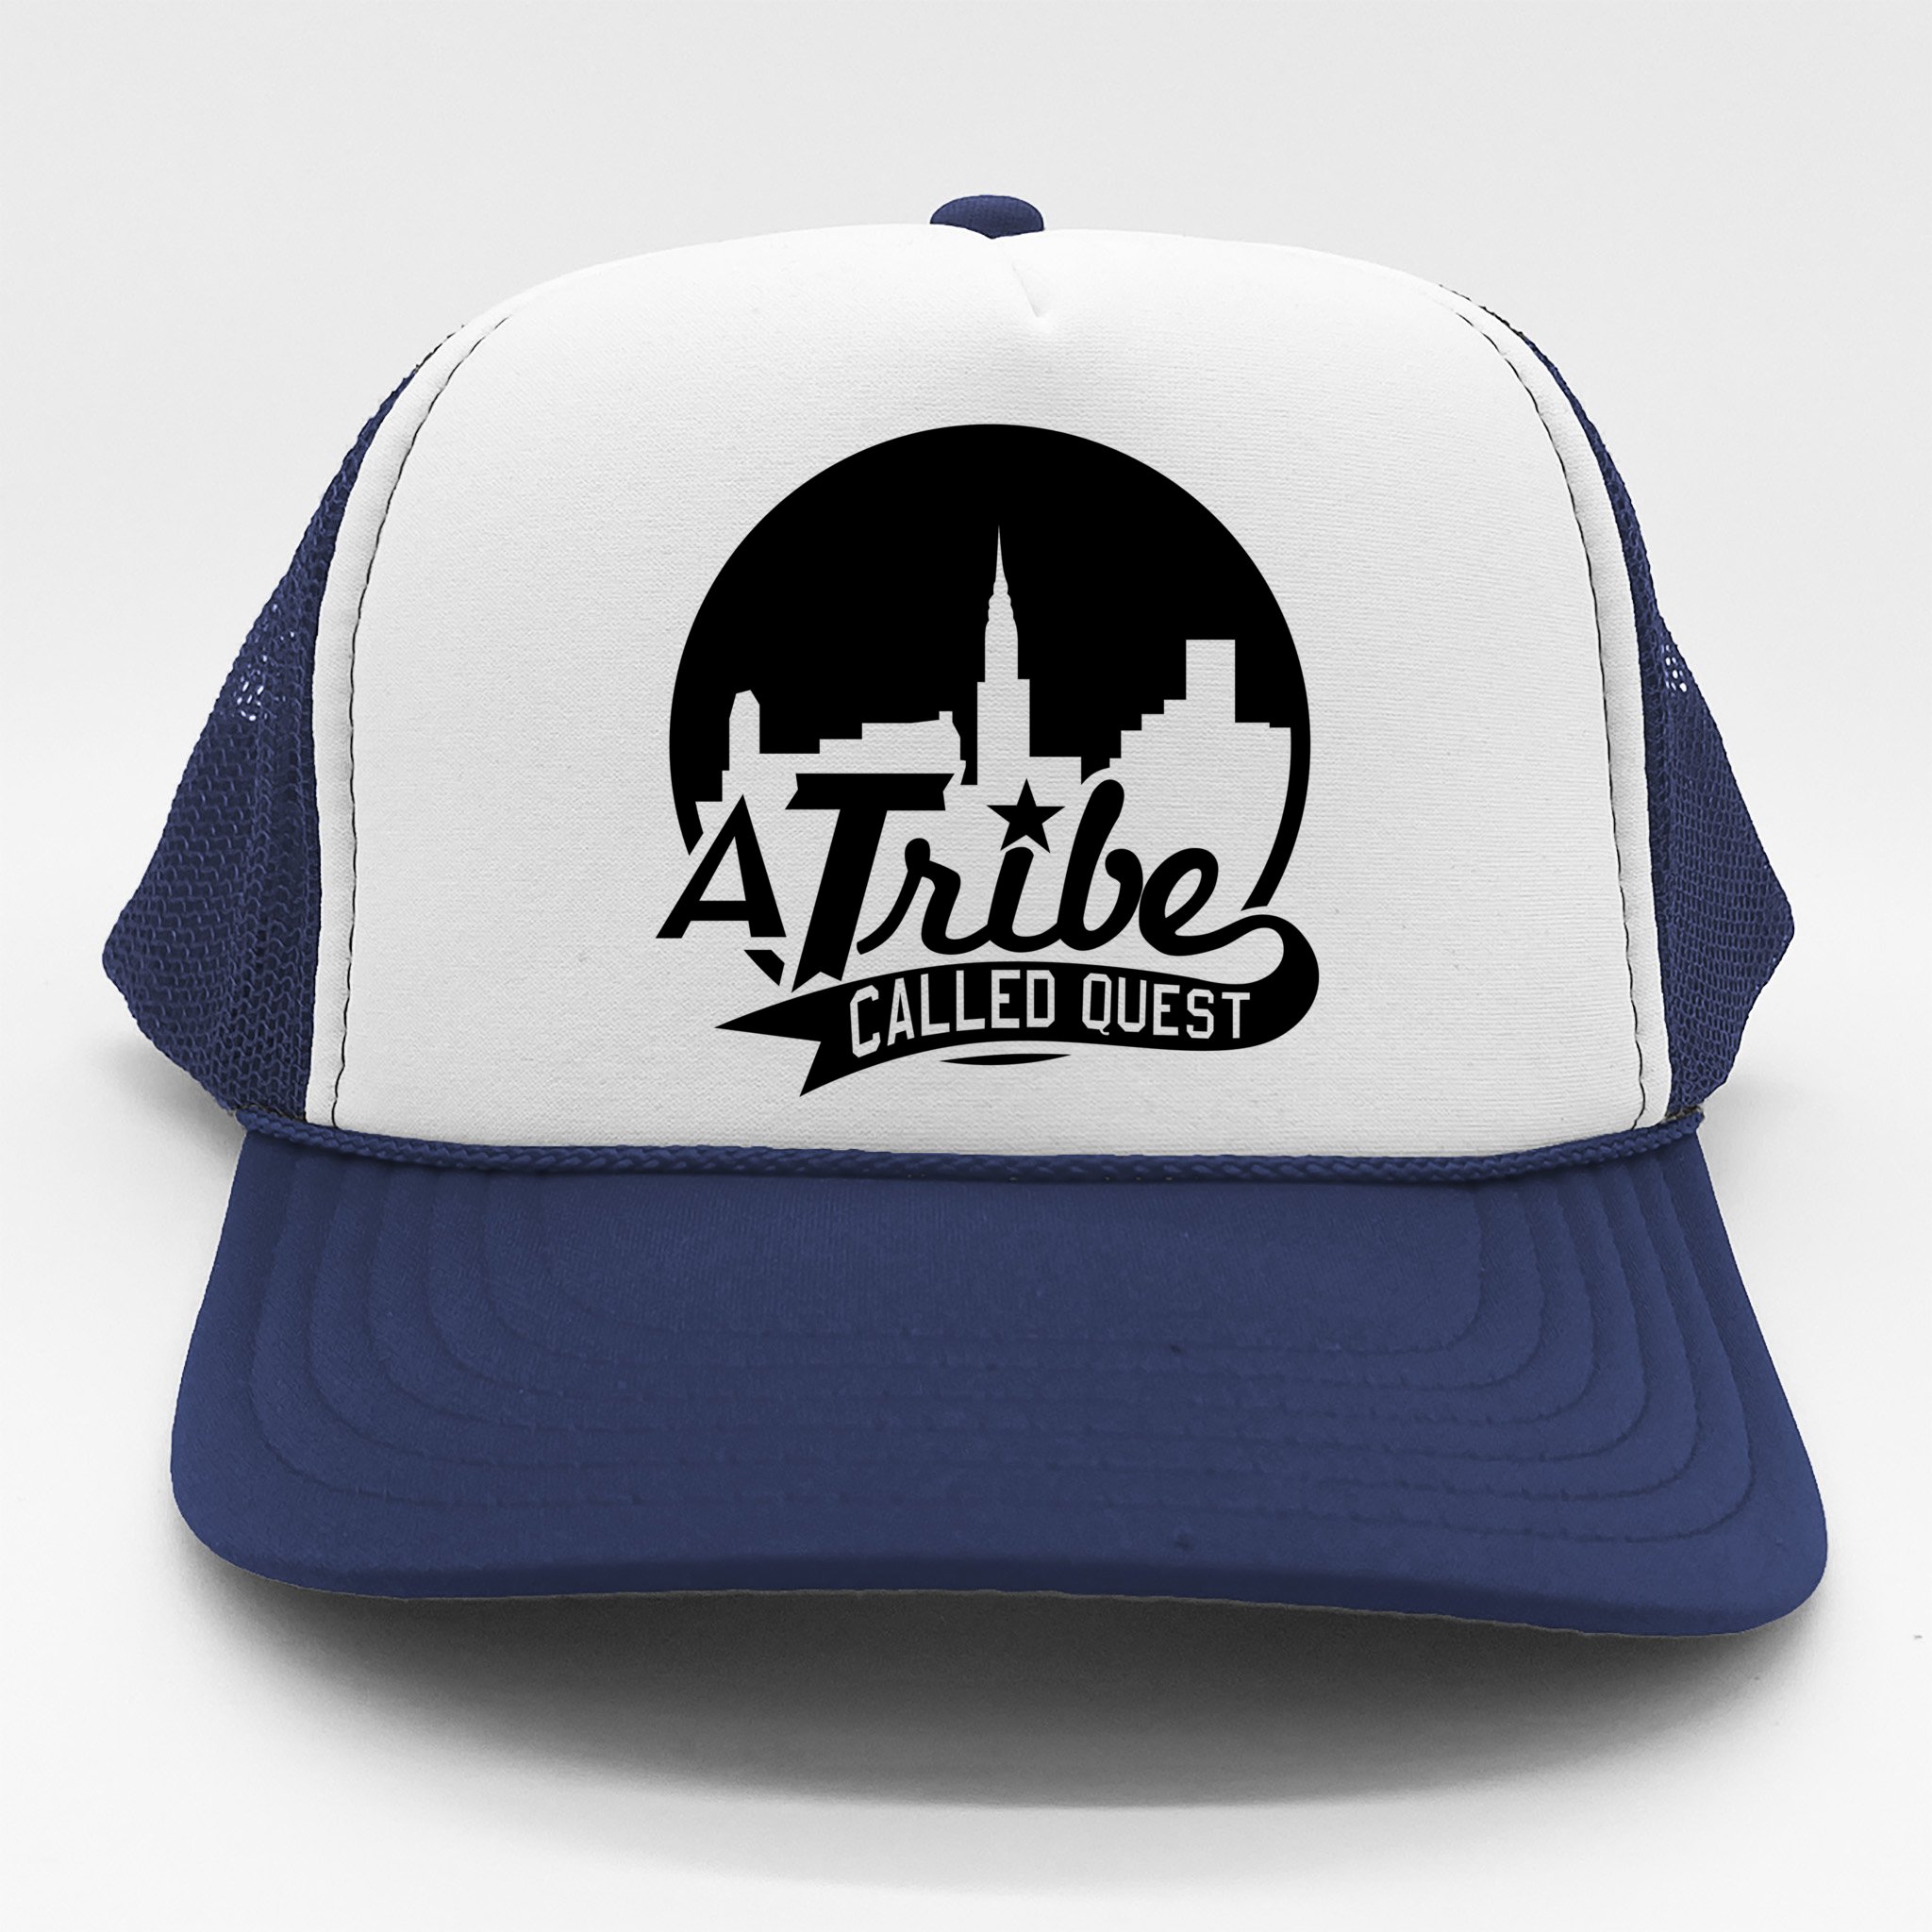 A Tribe Called Quest Trucker Hat